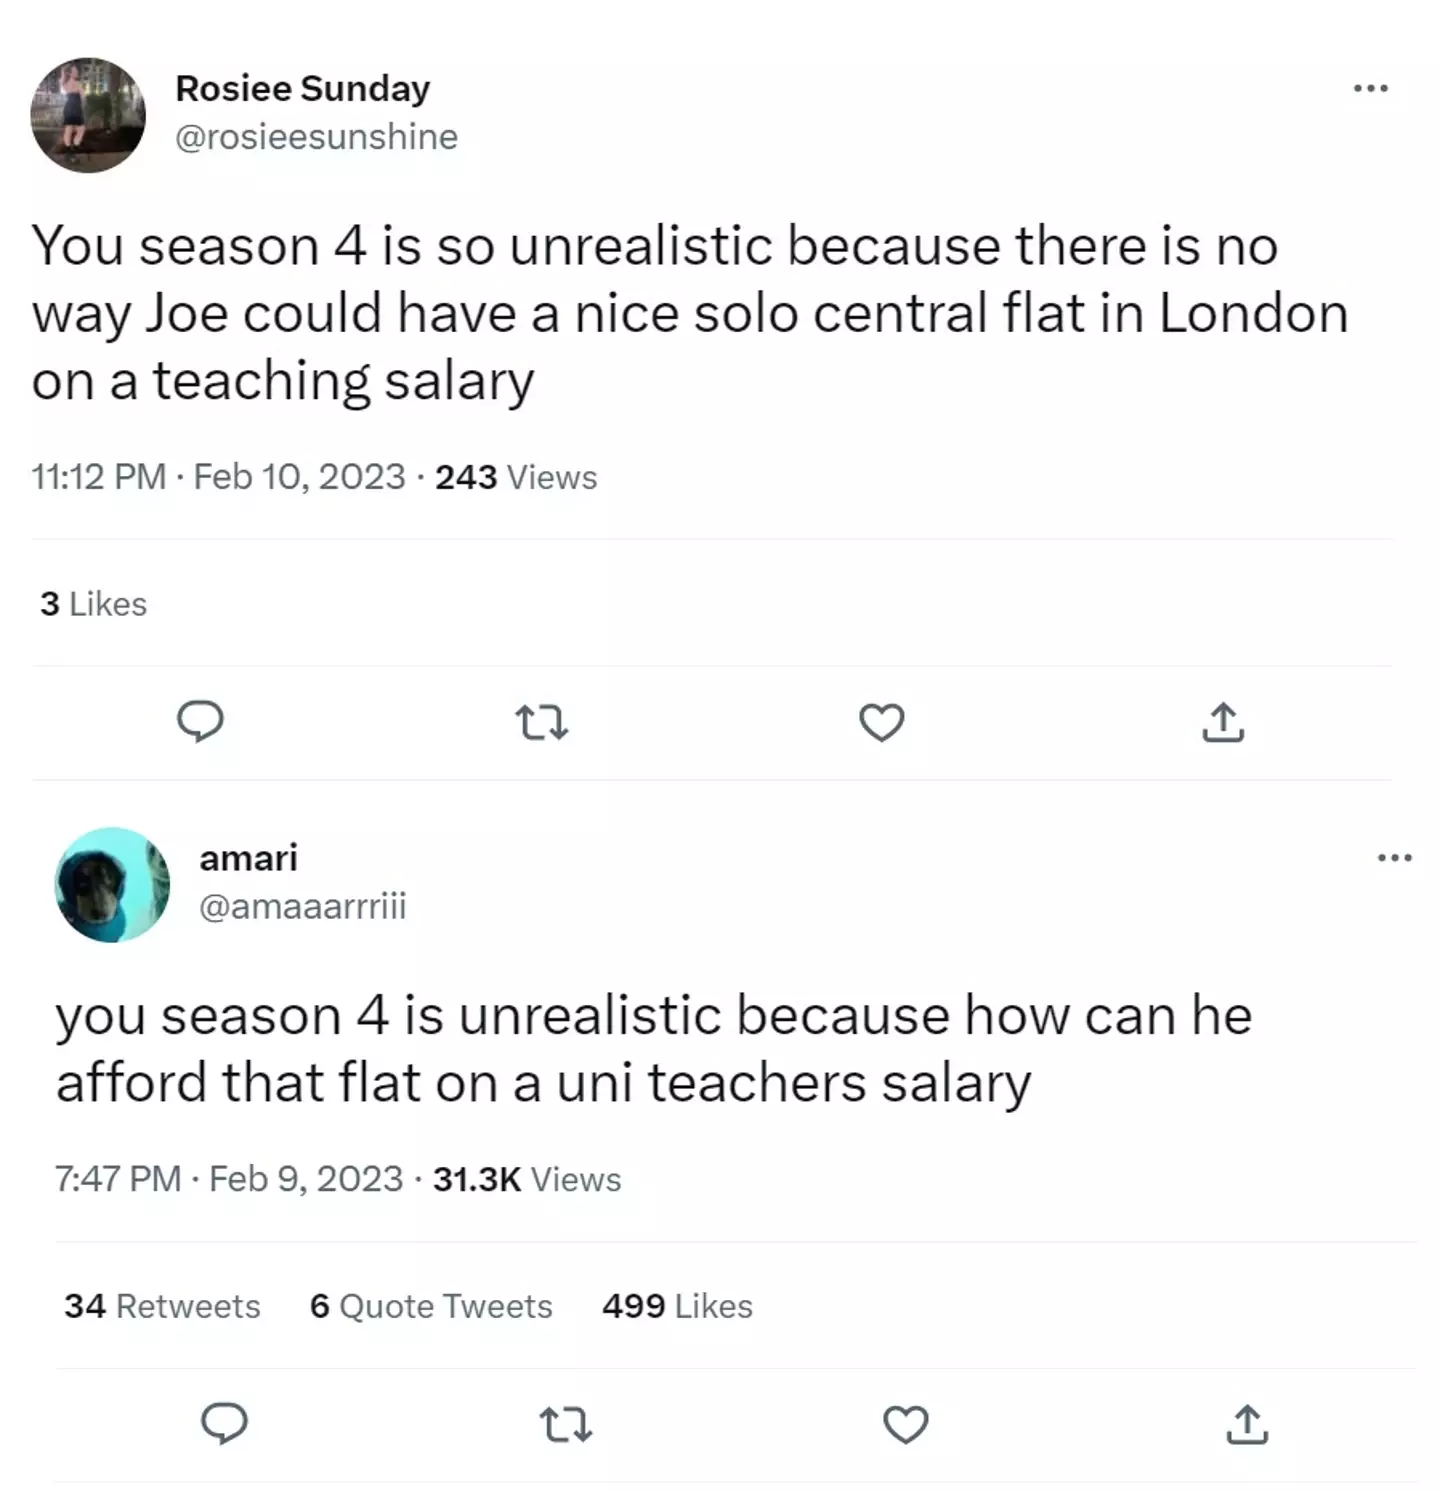 There's no way Joe could afford his fancy London flat on a teacher's salary.